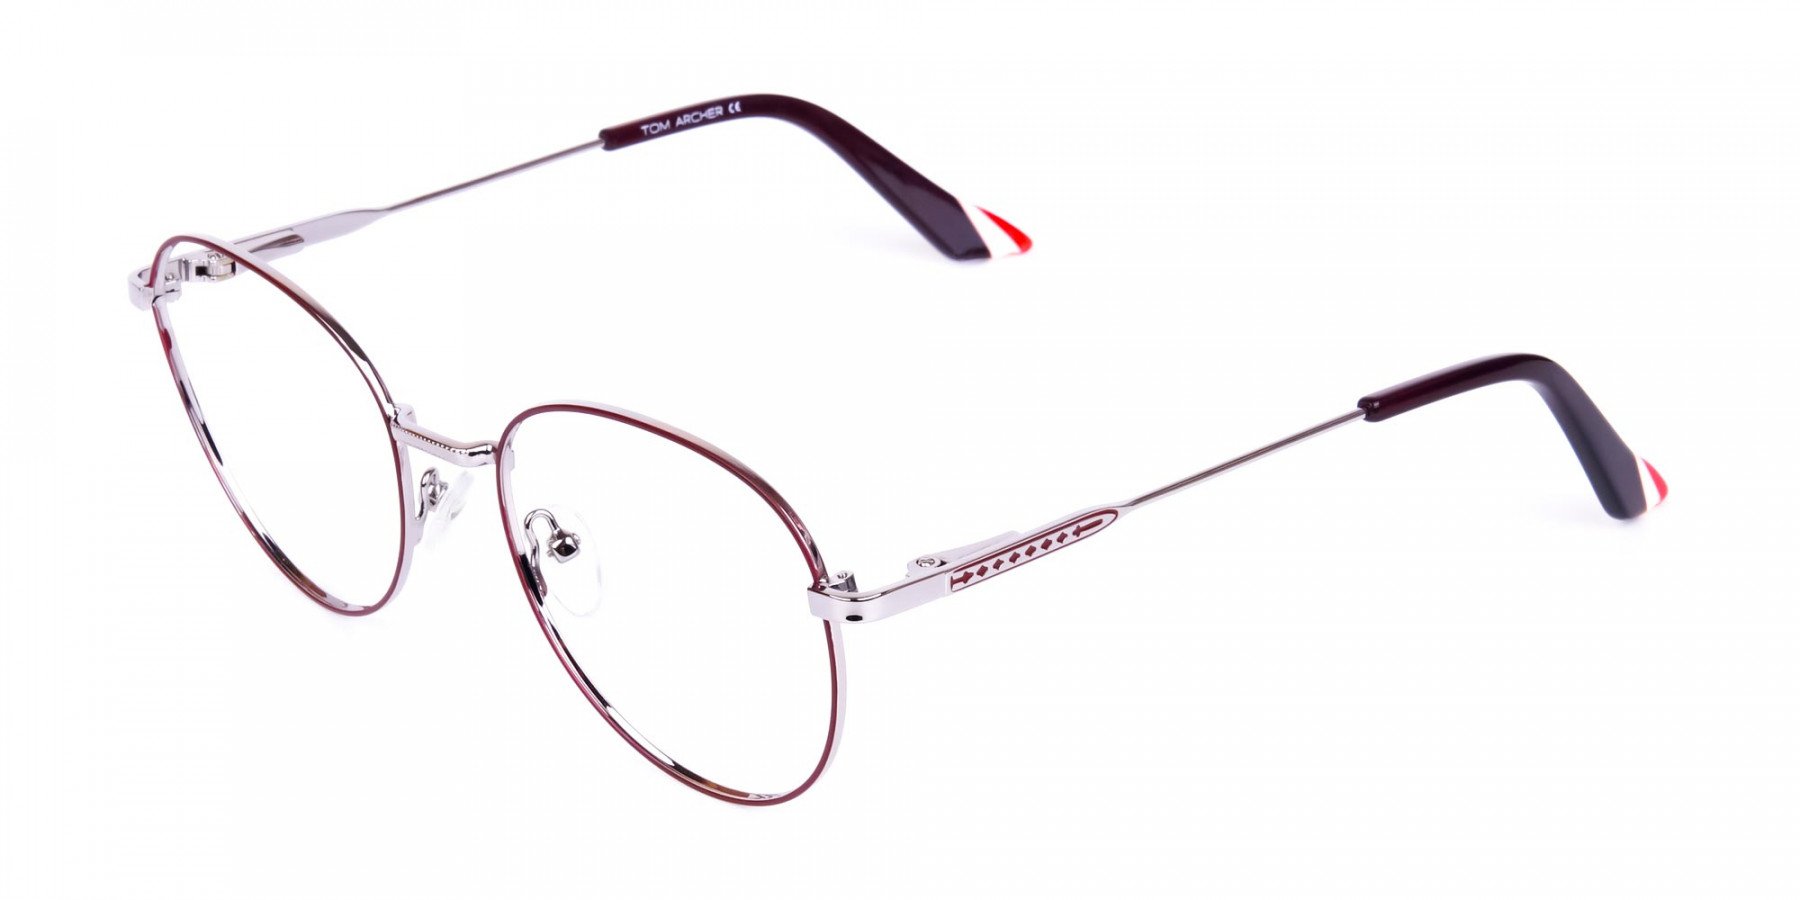 Burgundy-and-Silver-Round-Glasses-1